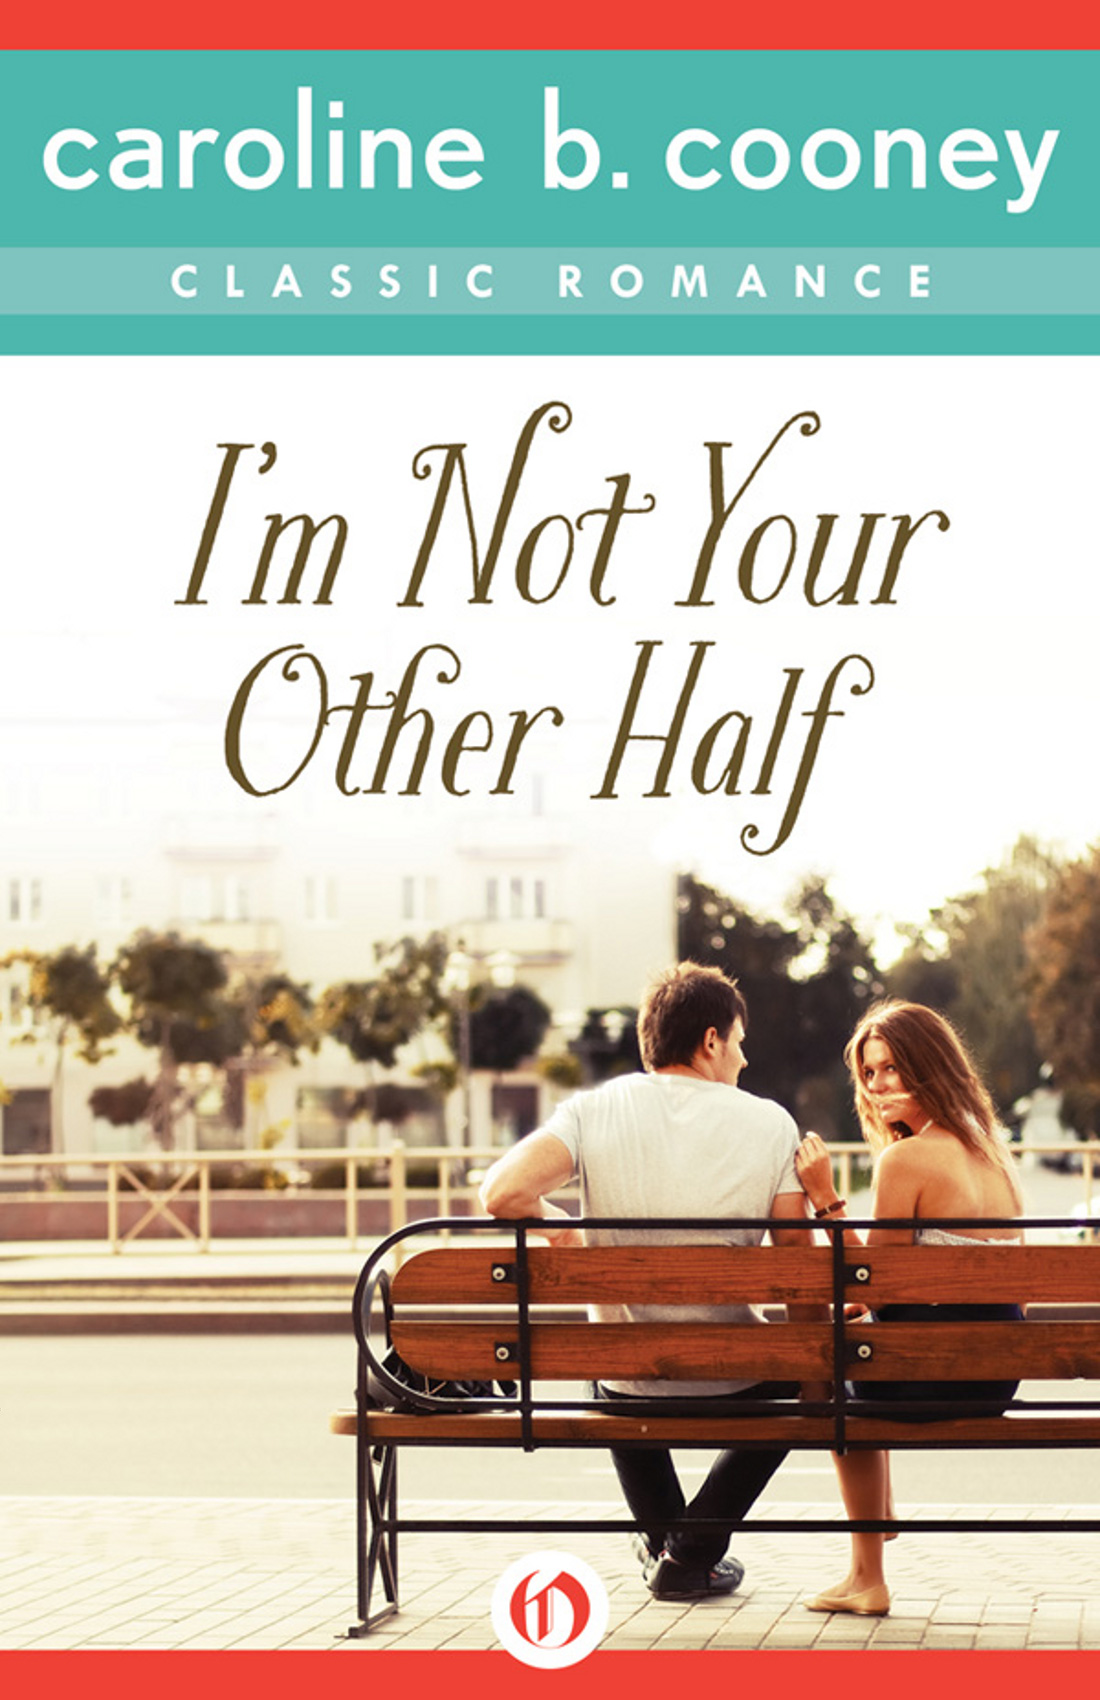 I'm Not Your Other Half by Caroline B. Cooney